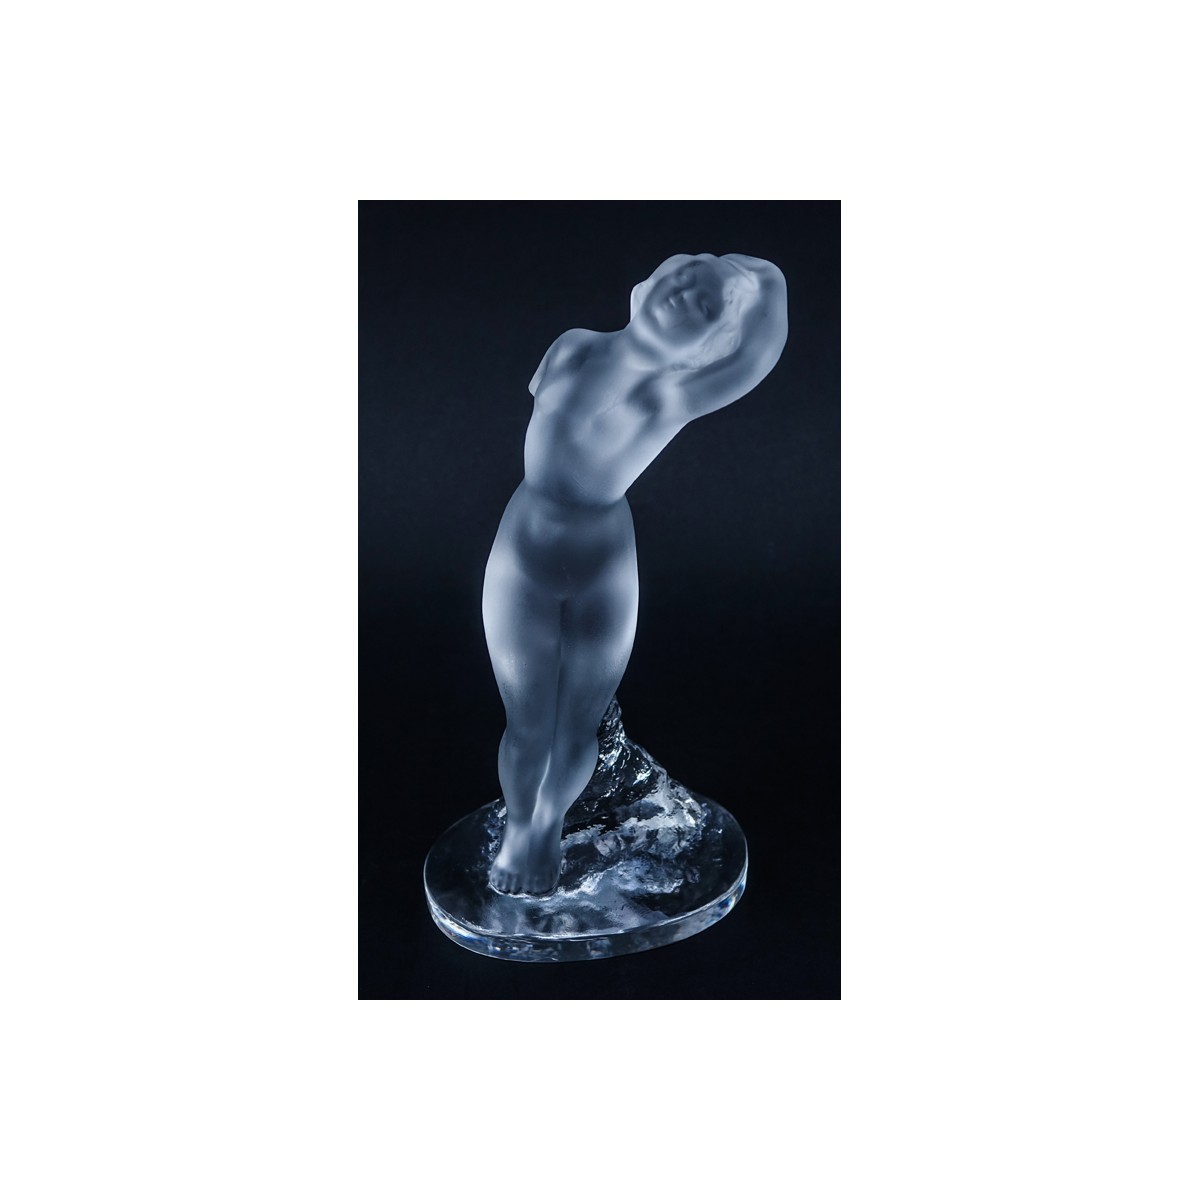 Group of Three (3): Lalique Nude Figurine, Zsolnay Eosin Tulip Pottery Candlestick, and Cameo Glass Vase. All signed appropriately.